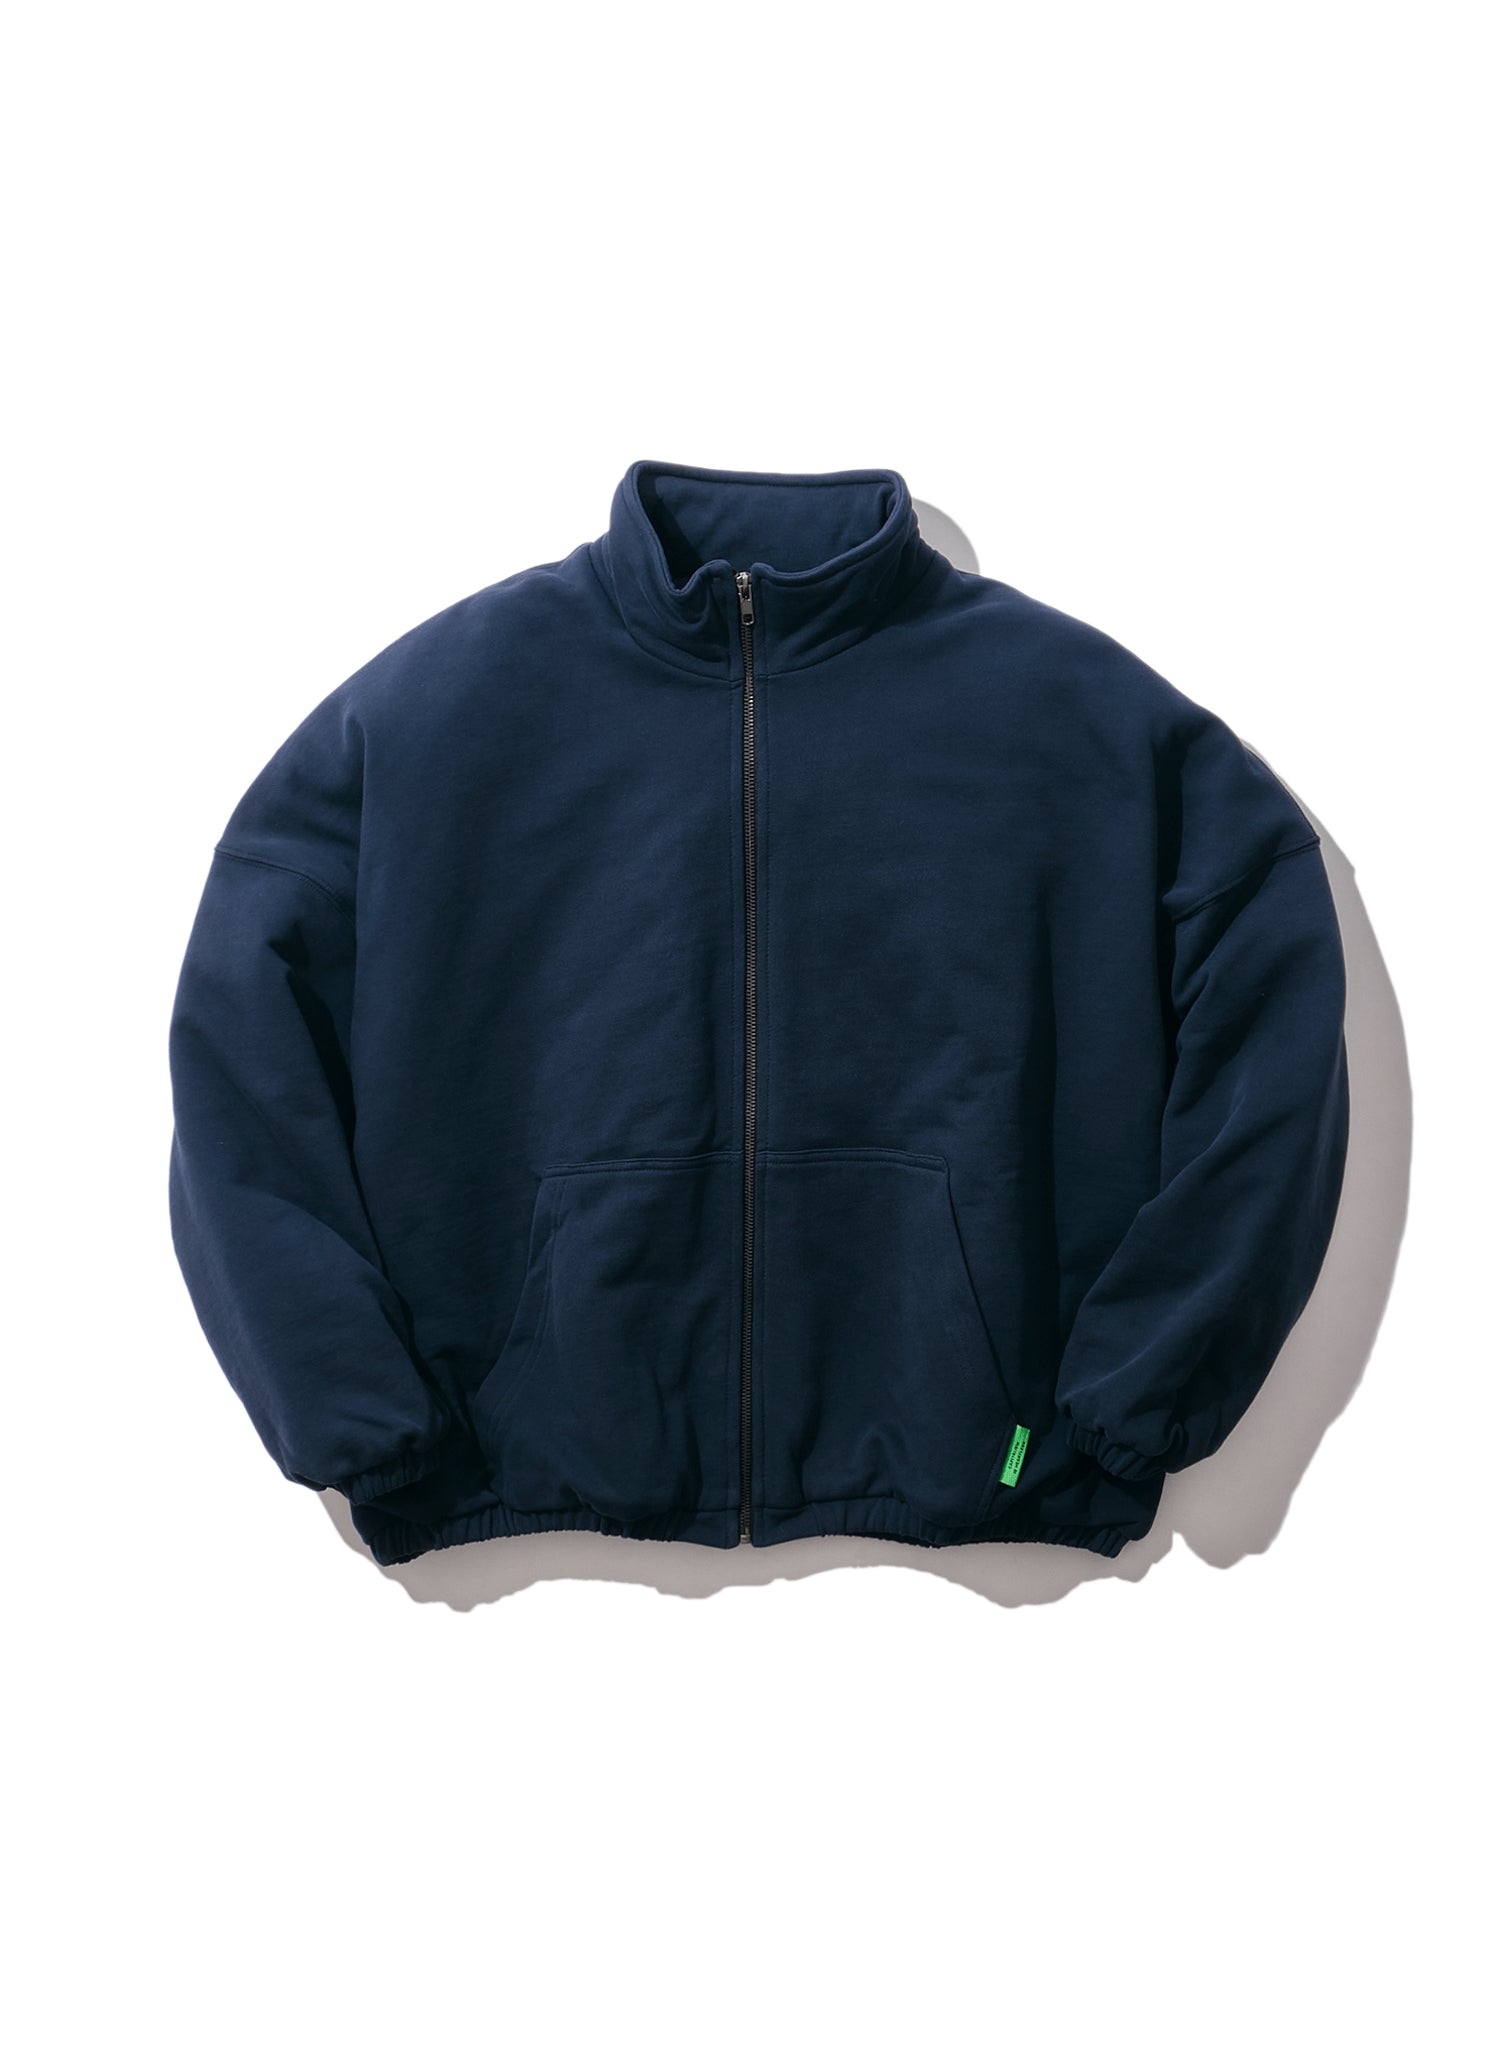 Last One WILLY CHAVARRIA / FULL ZIP QUILTED WARRIOR JACKET BLUE MOOD